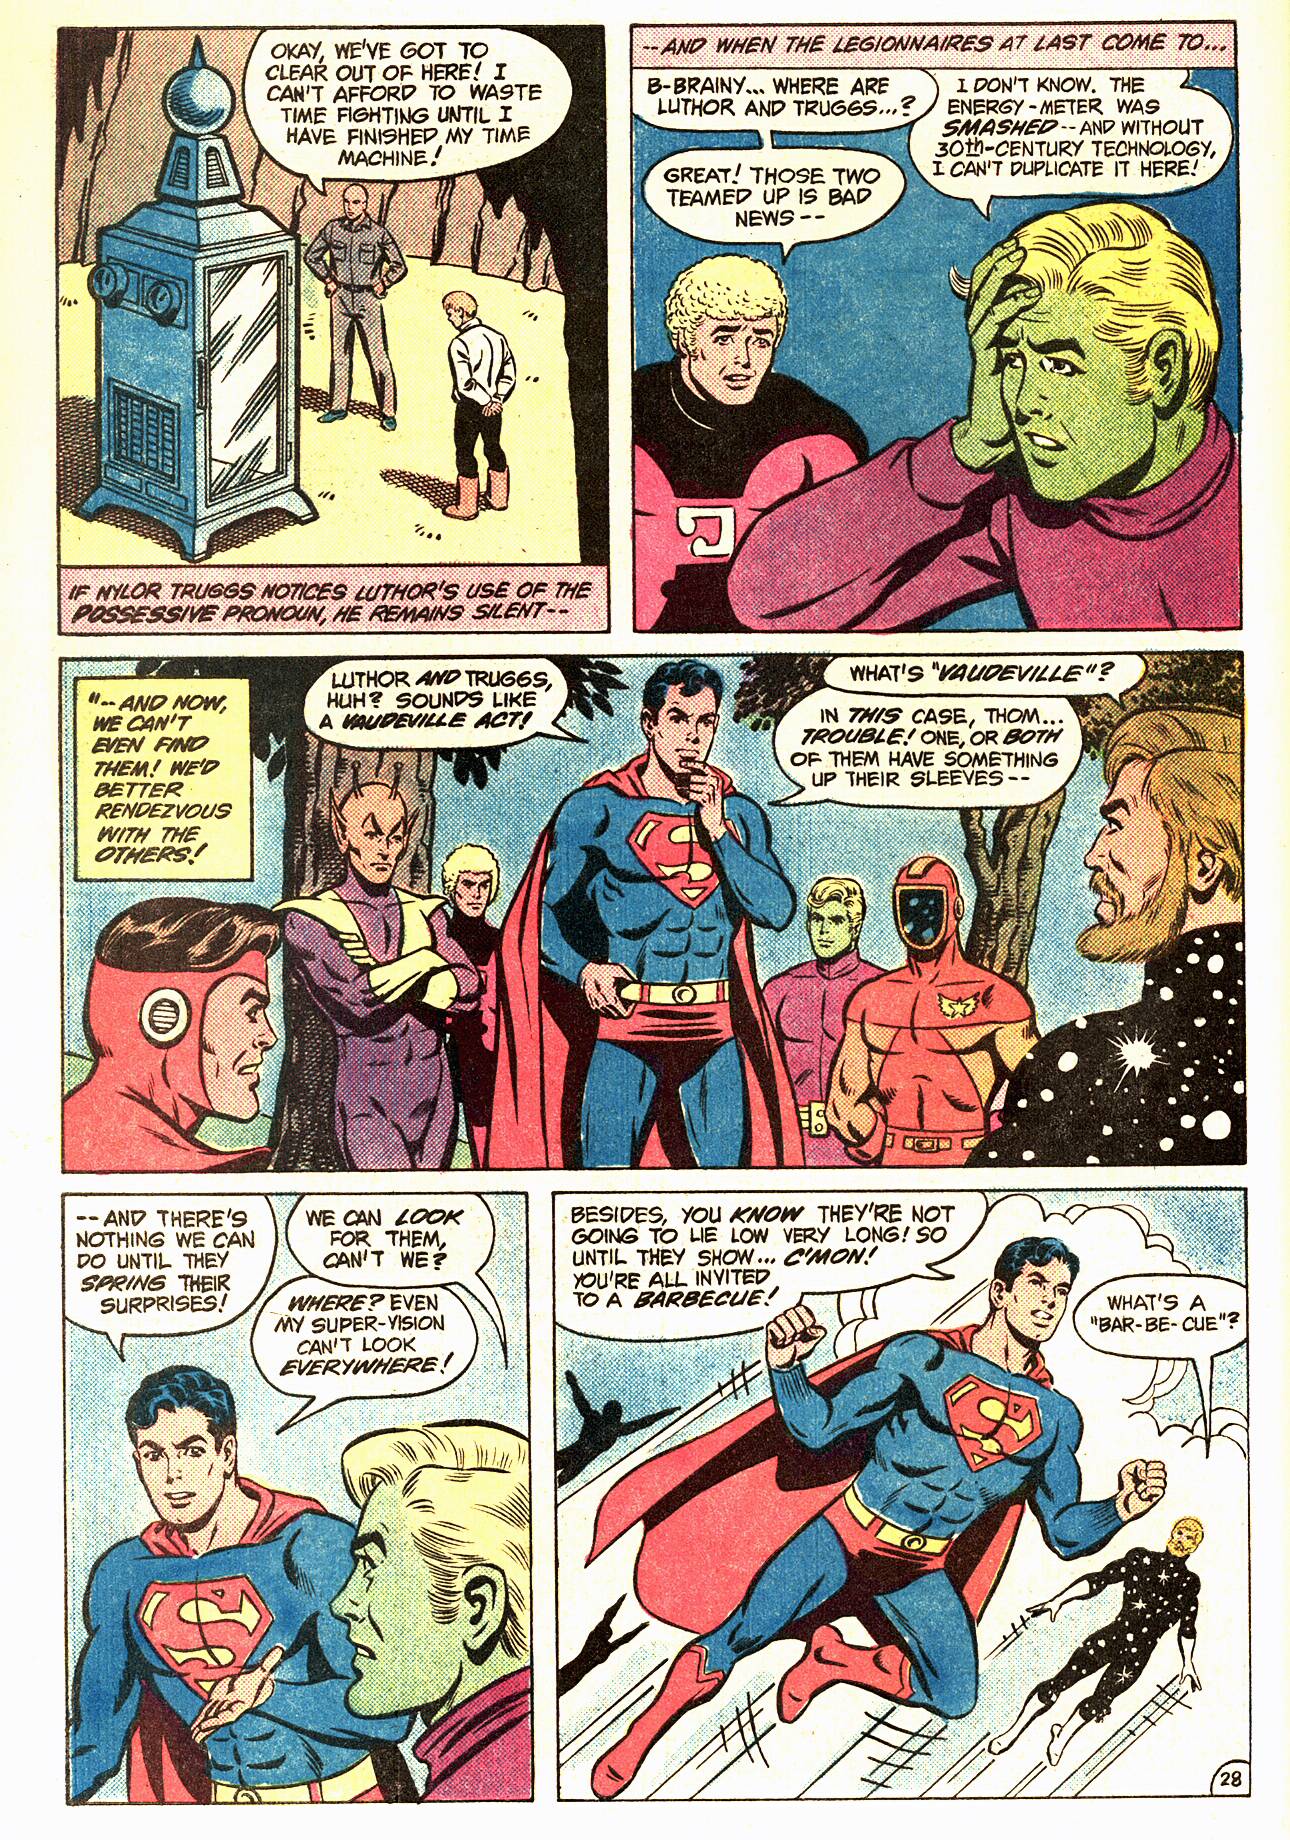 The New Adventures of Superboy 50 Page 28